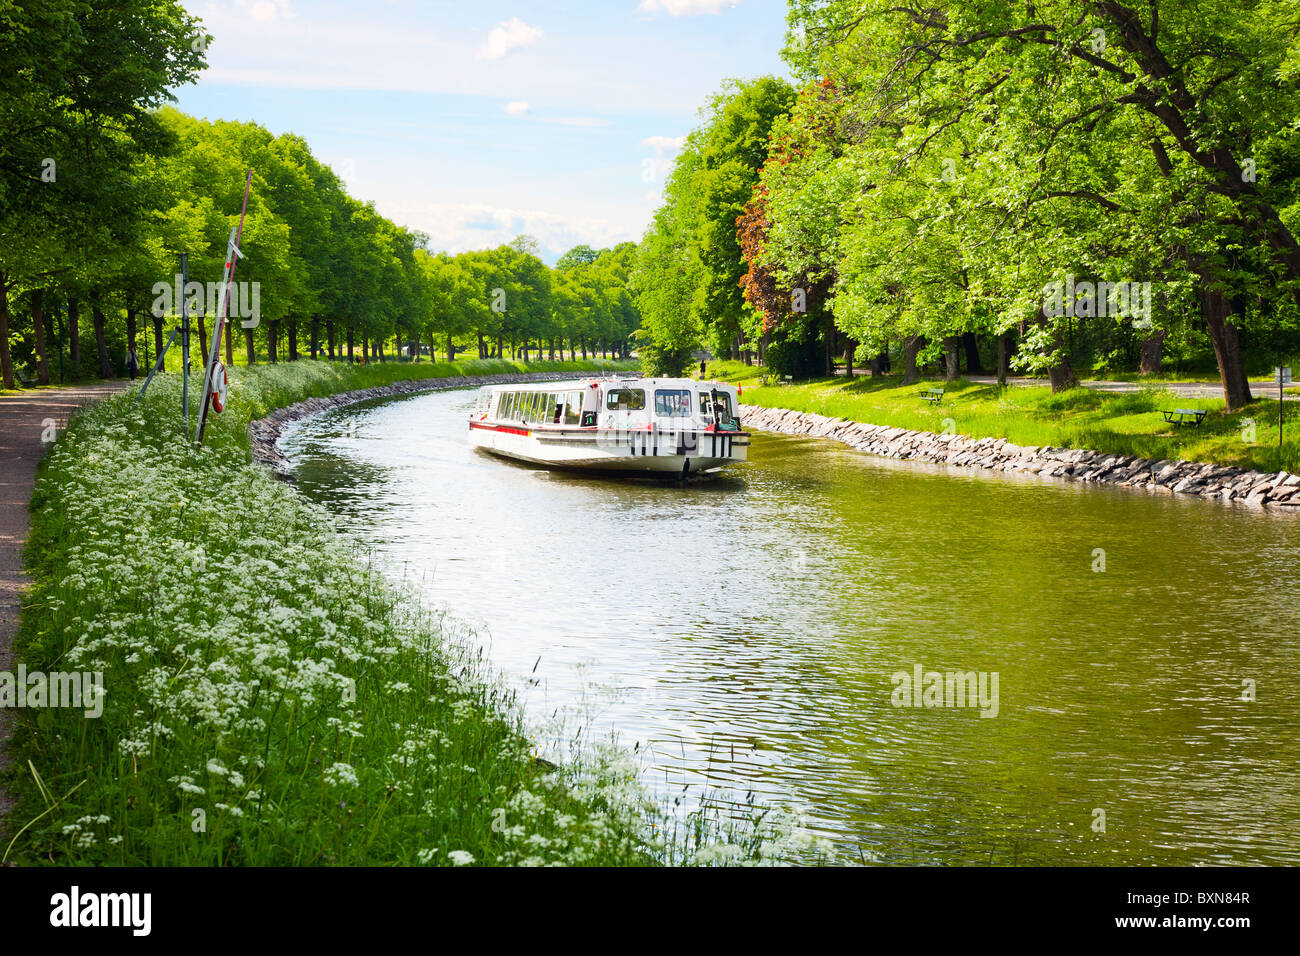 Sightseeing boat on the canal through Djurgarden, Stockholm, Sweden. Stock Photo